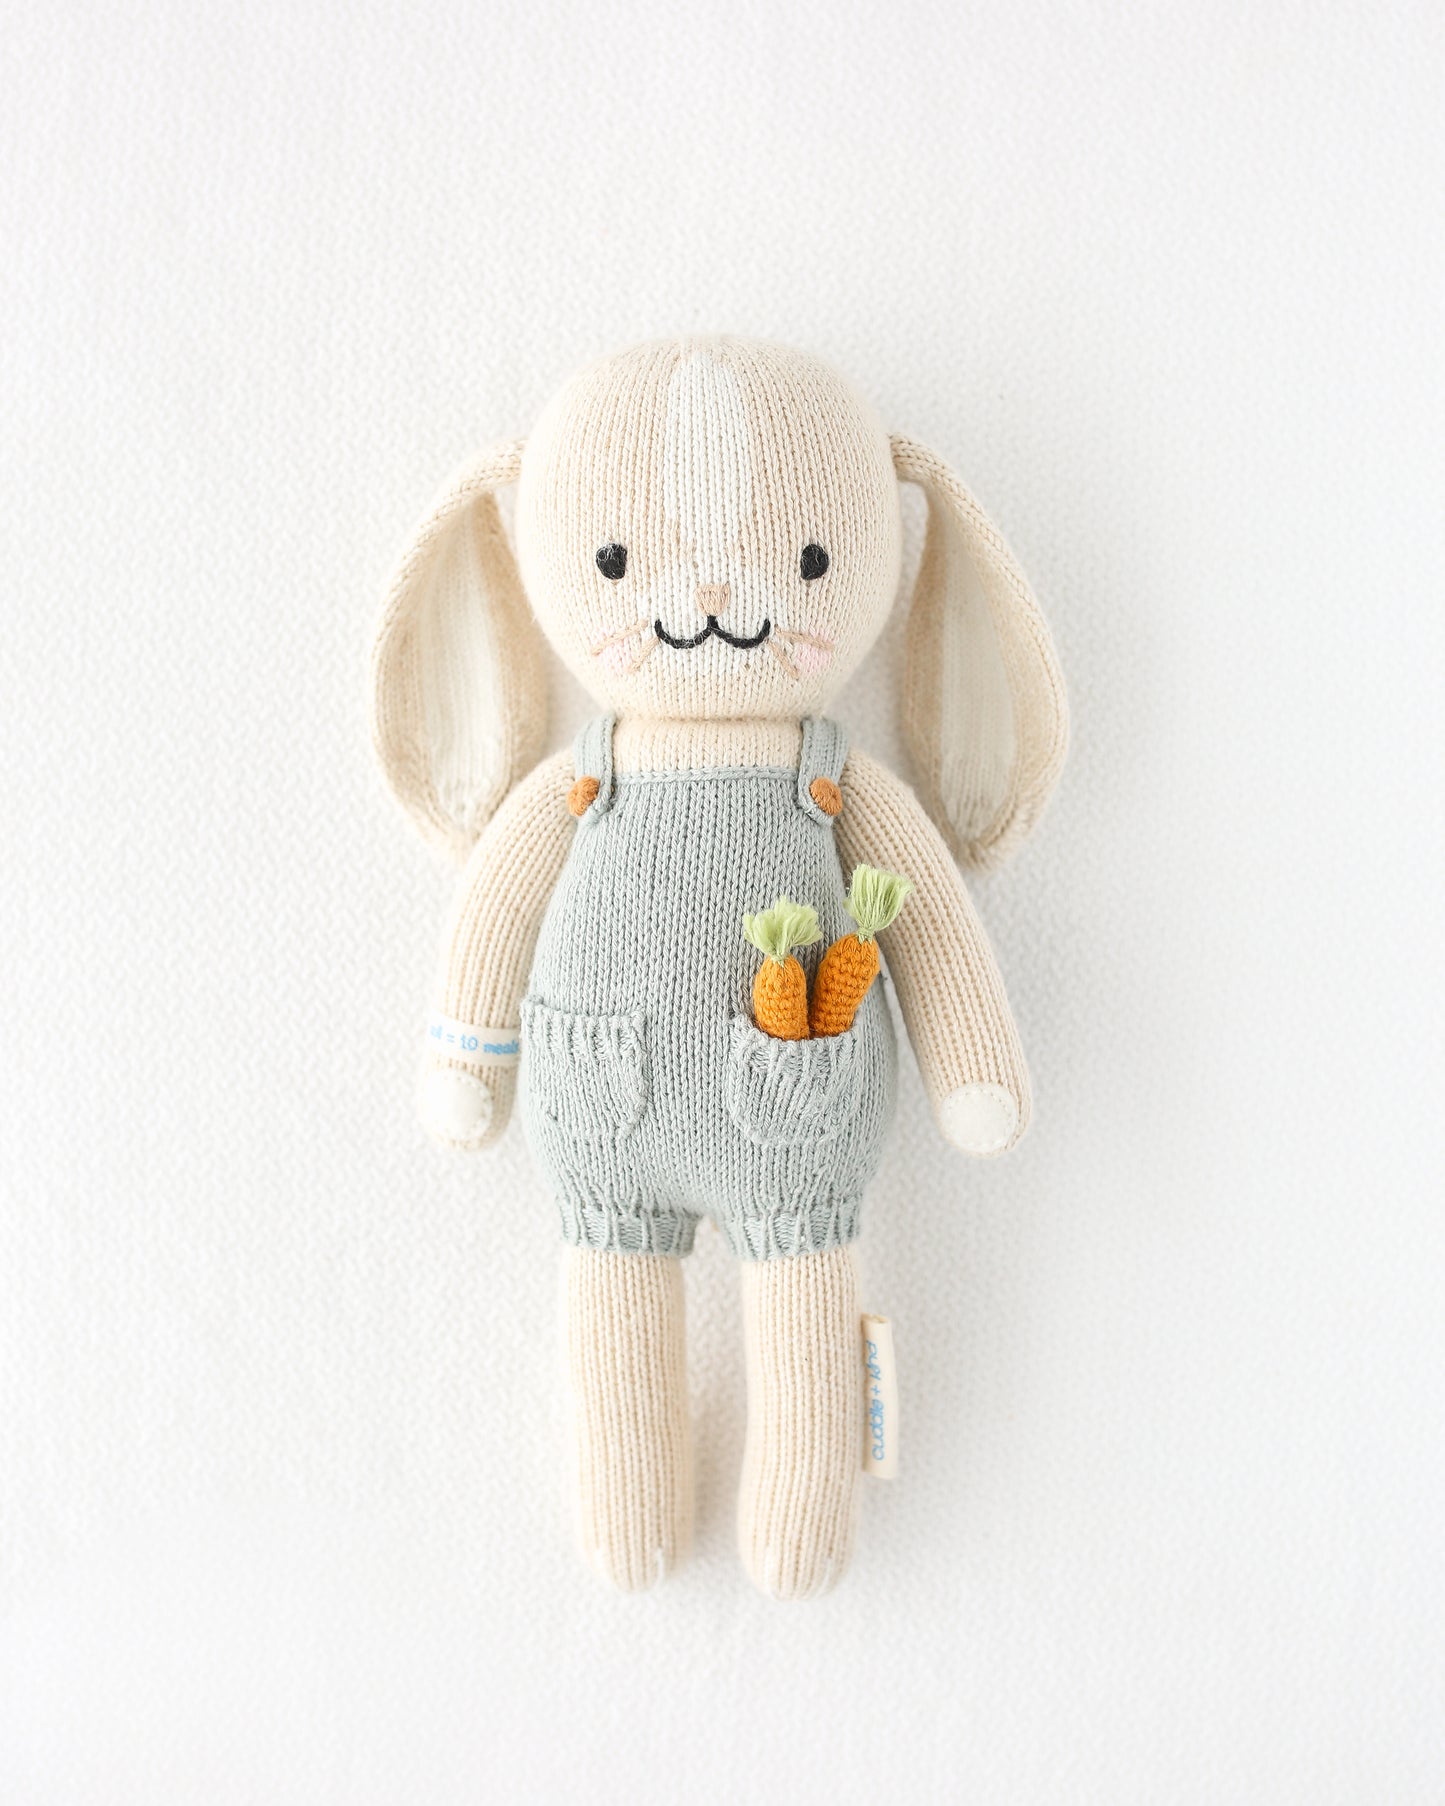 henry the bunny by cuddle + kind